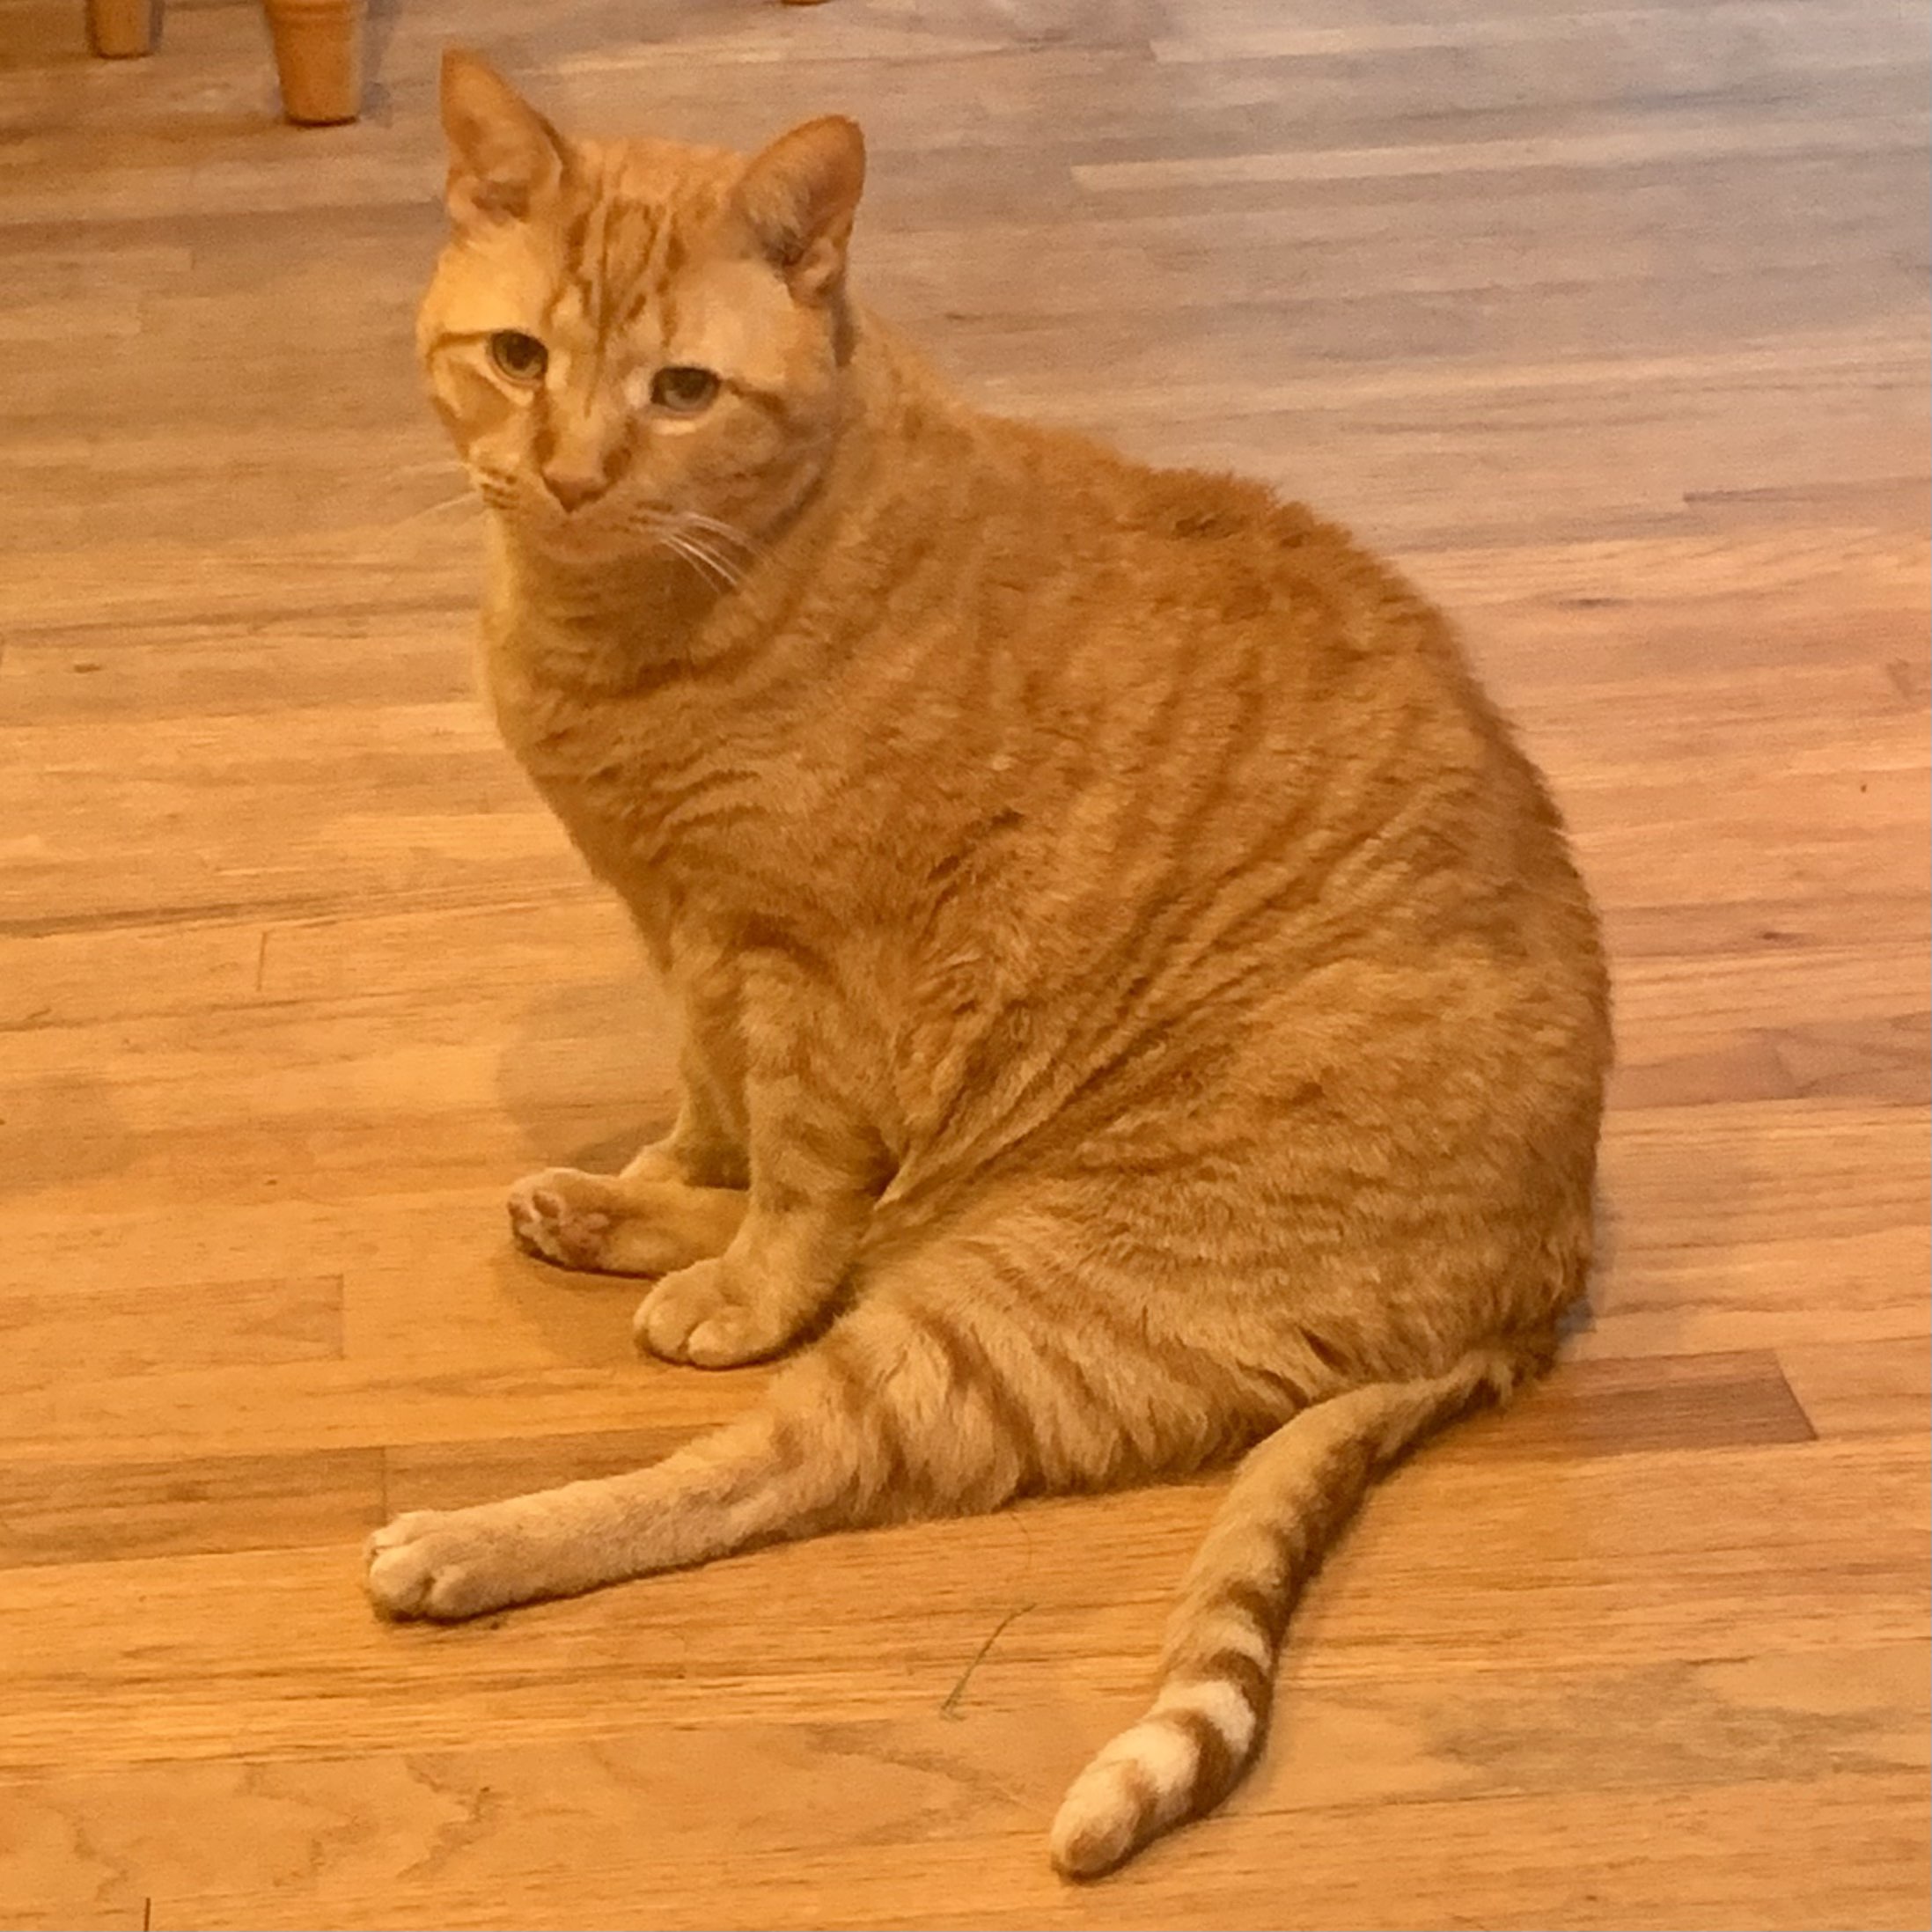 a low quality picture of stanley sitting on the floor. his body is facing to the left while he looks in the direction of the camera, and his legs are sticking out like he is sitting as a person would. his front paws are propped on each side of his right leg